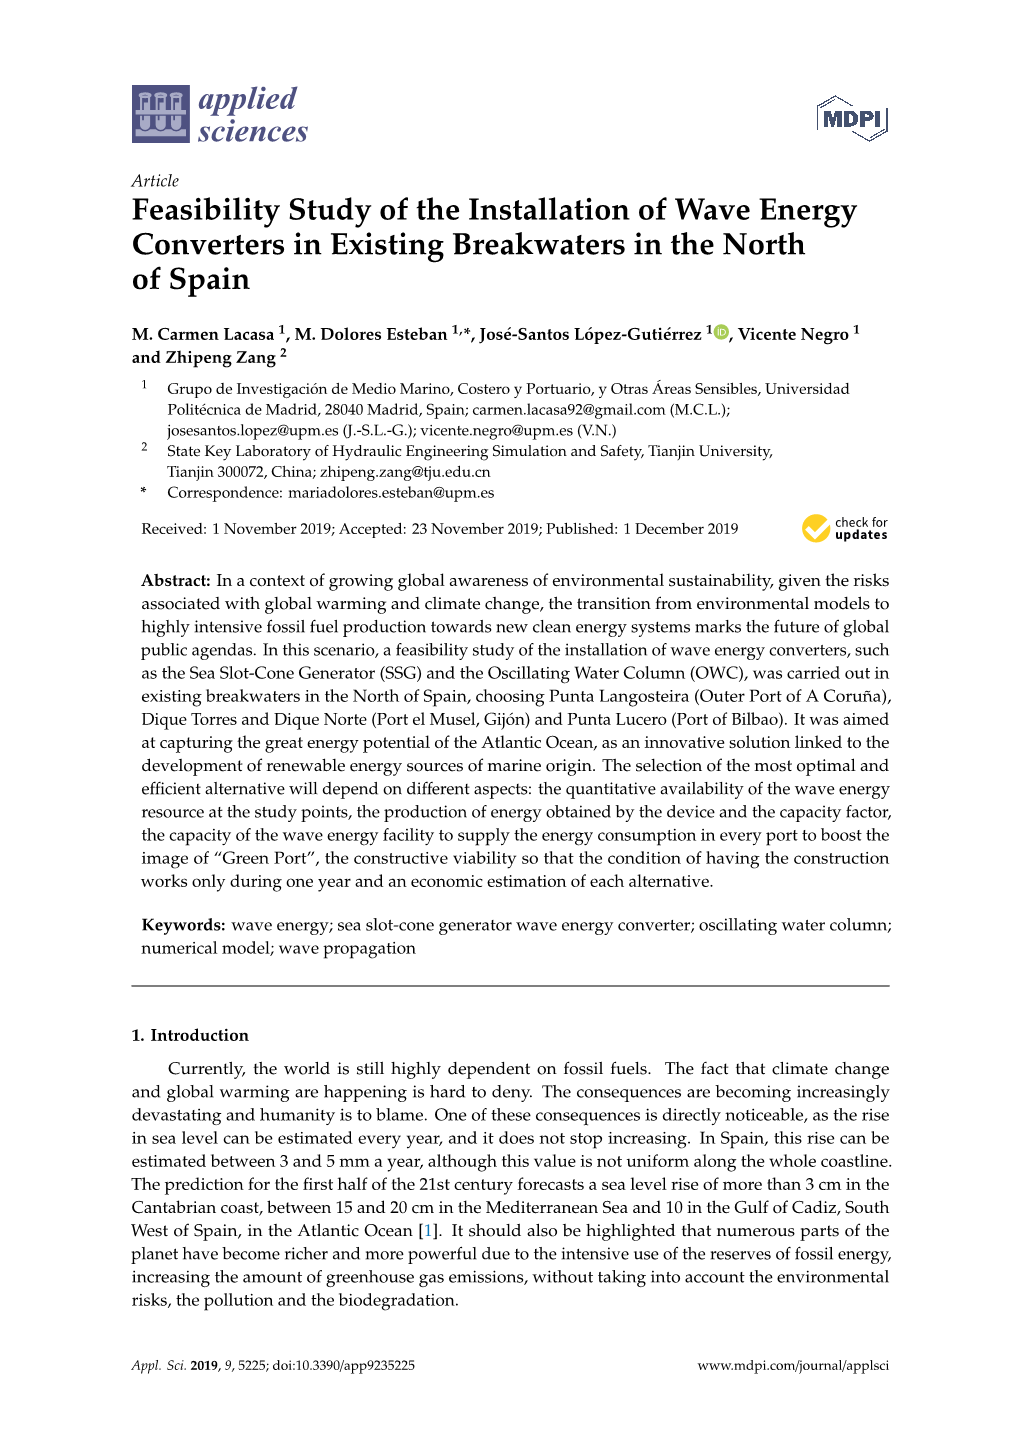 Feasibility Study of the Installation of Wave Energy Converters in Existing Breakwaters in the North of Spain